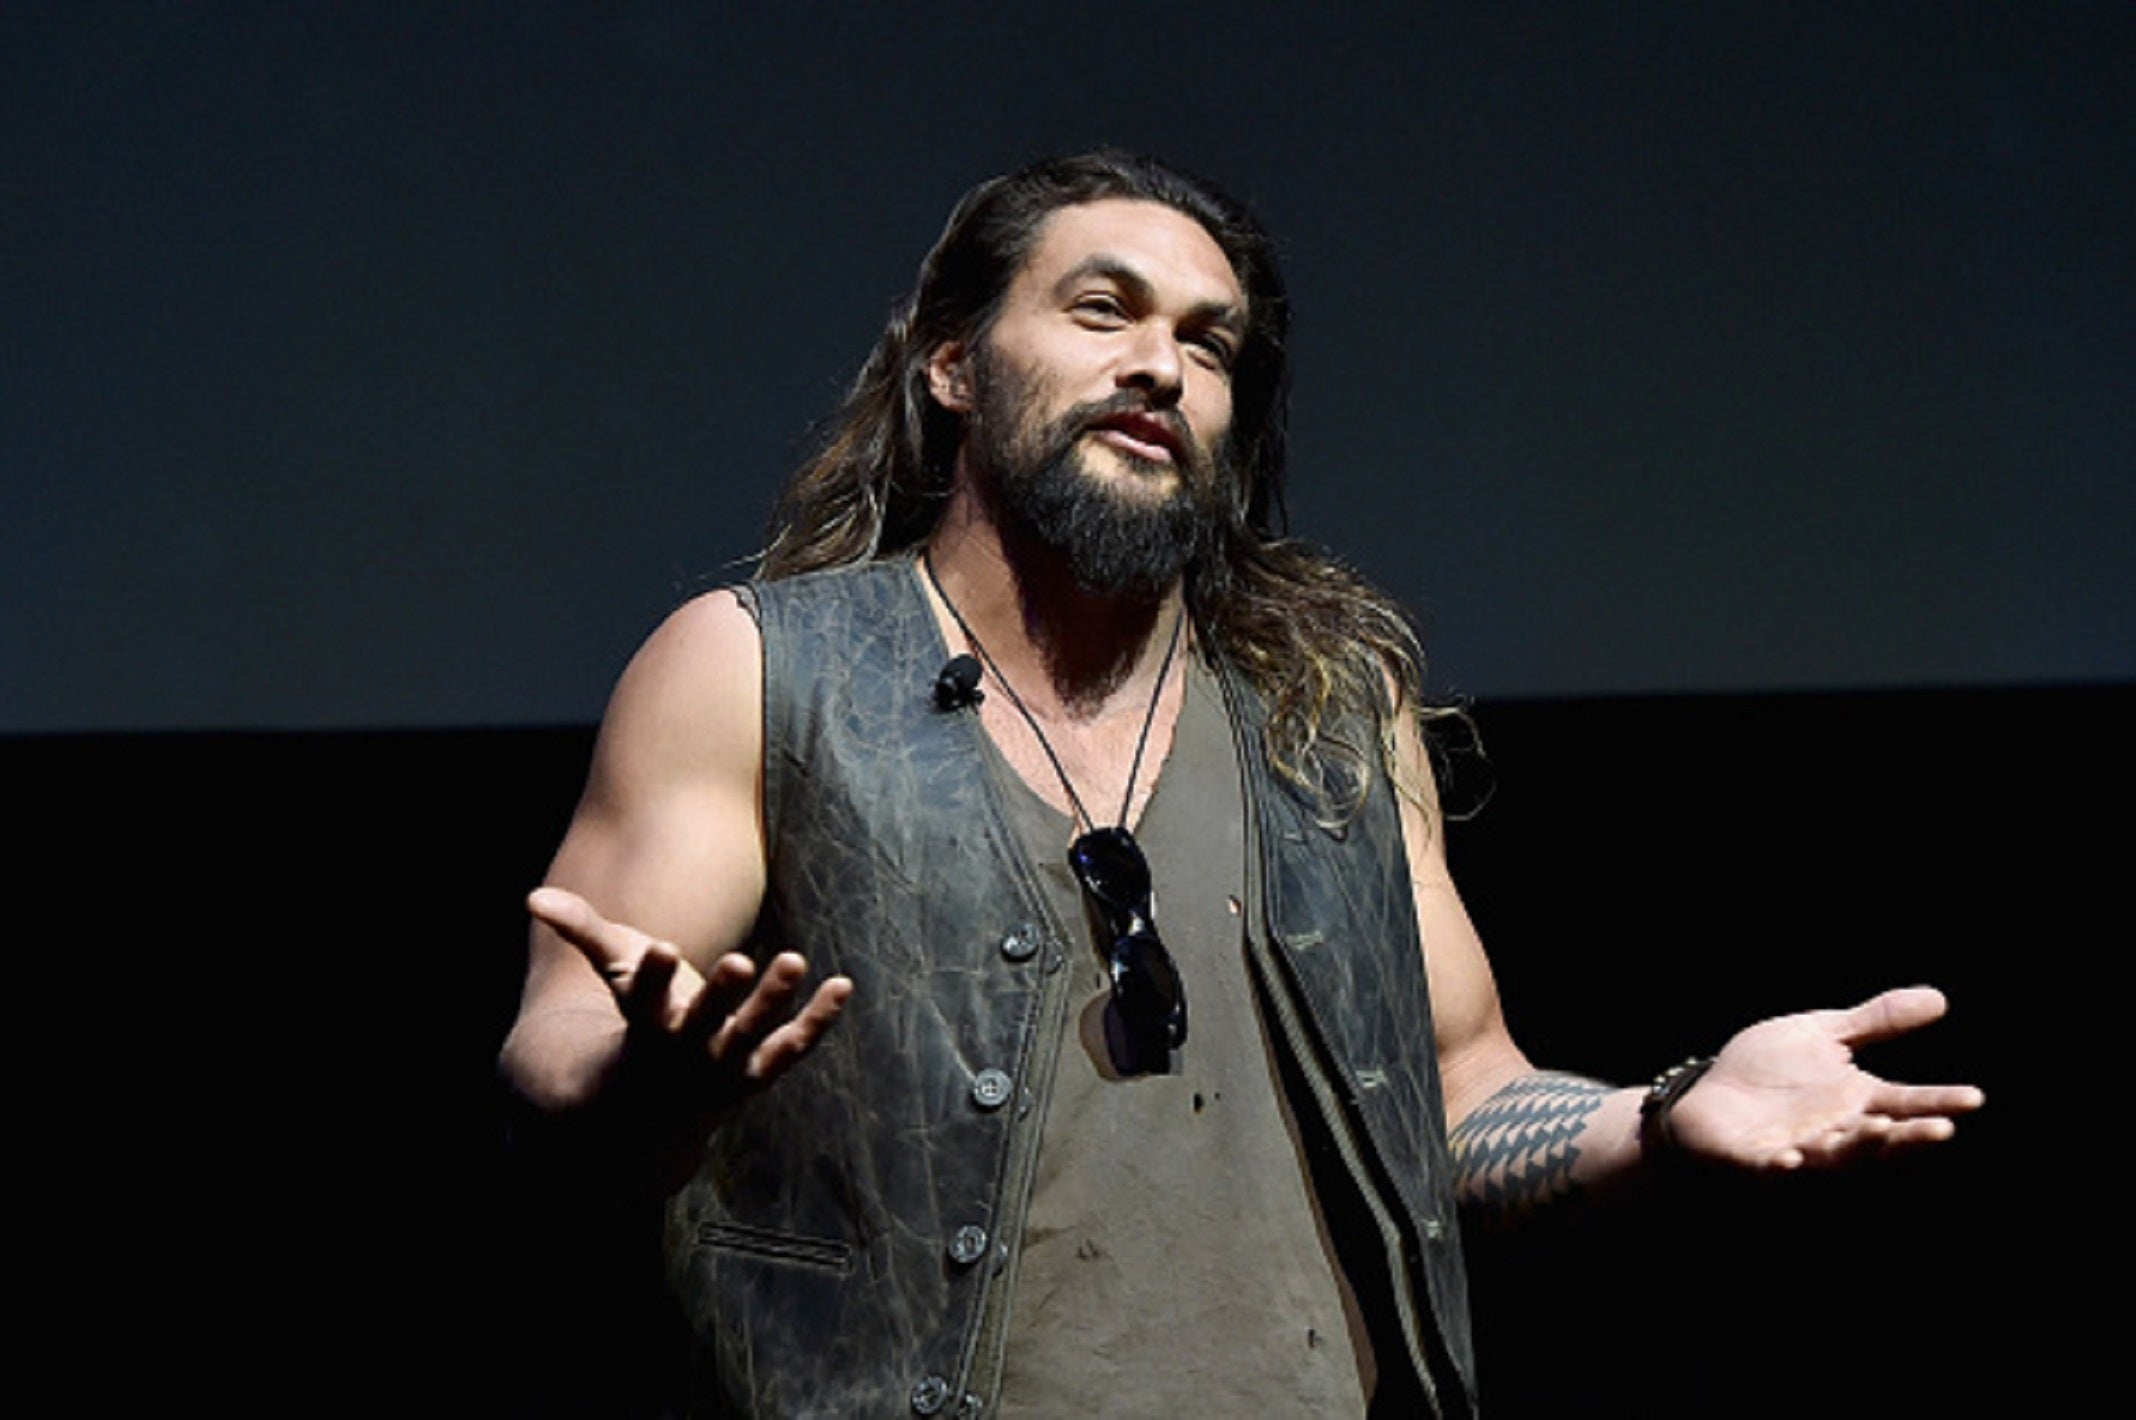 Game of Thrones actor Jason Momoa joked about 'raping beautiful women' on TV show ...